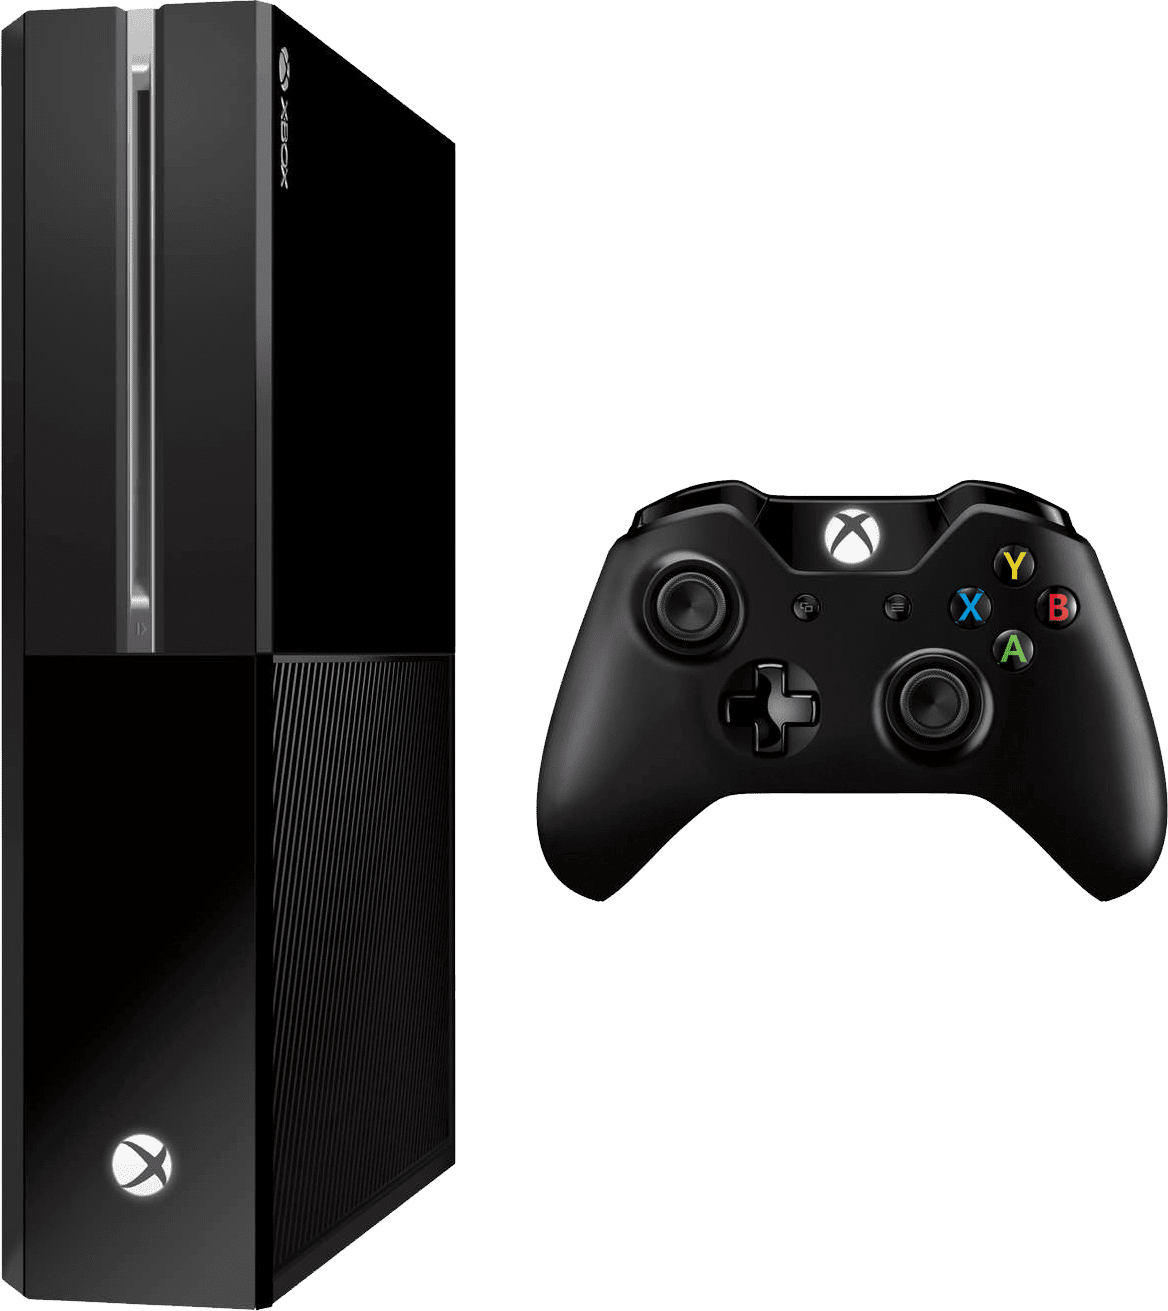 Download Png Xbox One | PNG & GIF BASE